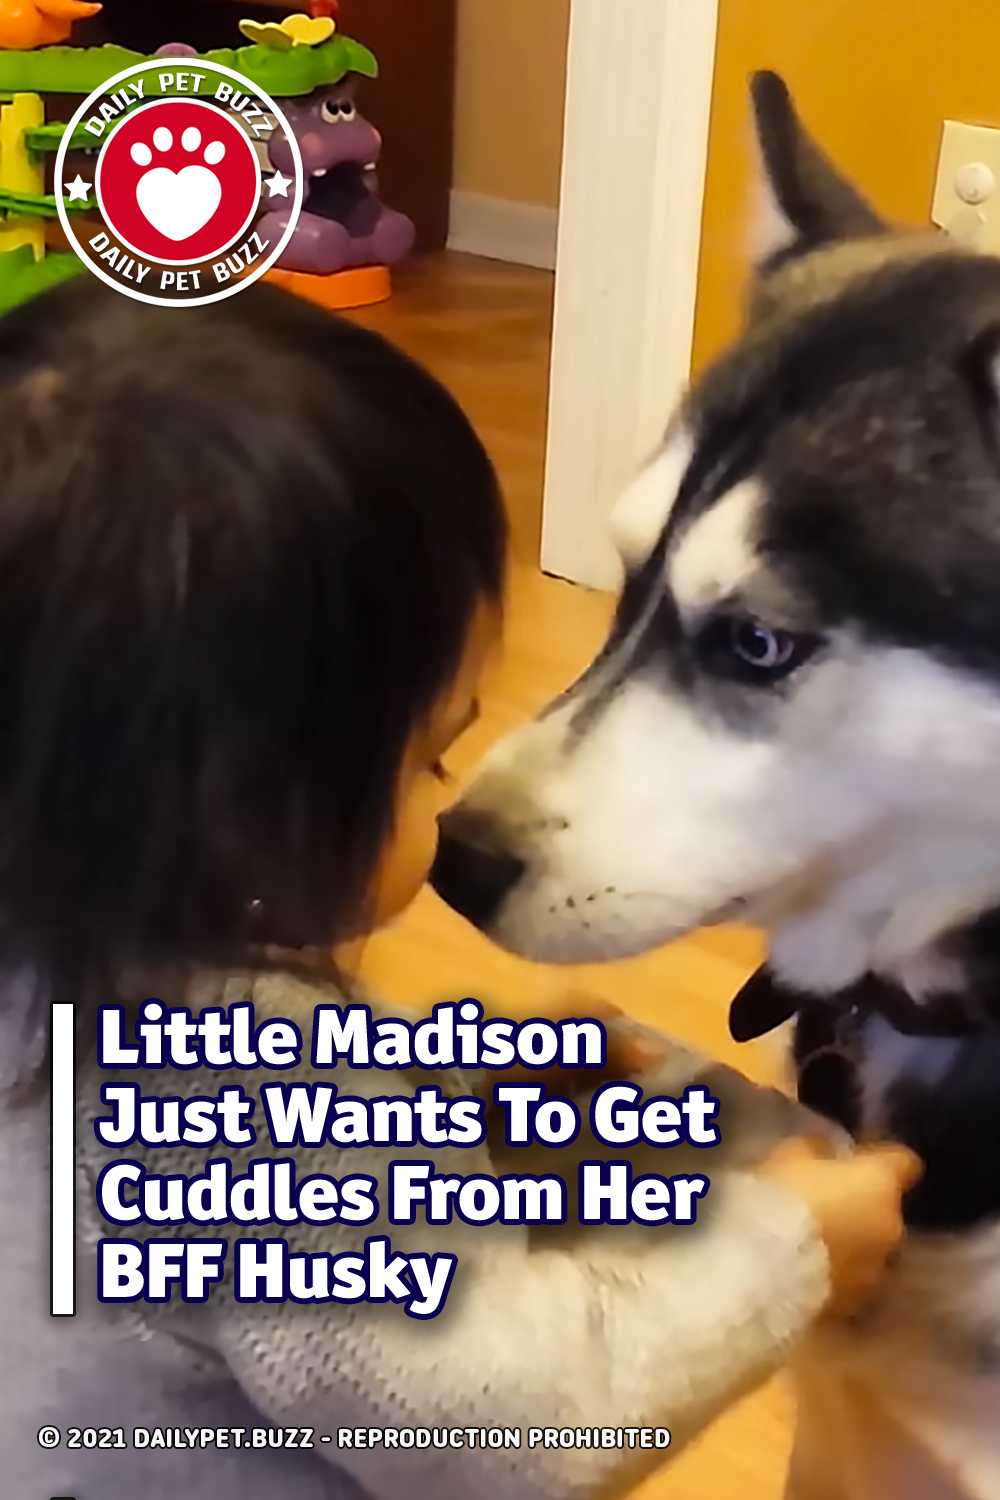 Little Madison Just Wants To Get Cuddles From Her BFF Husky